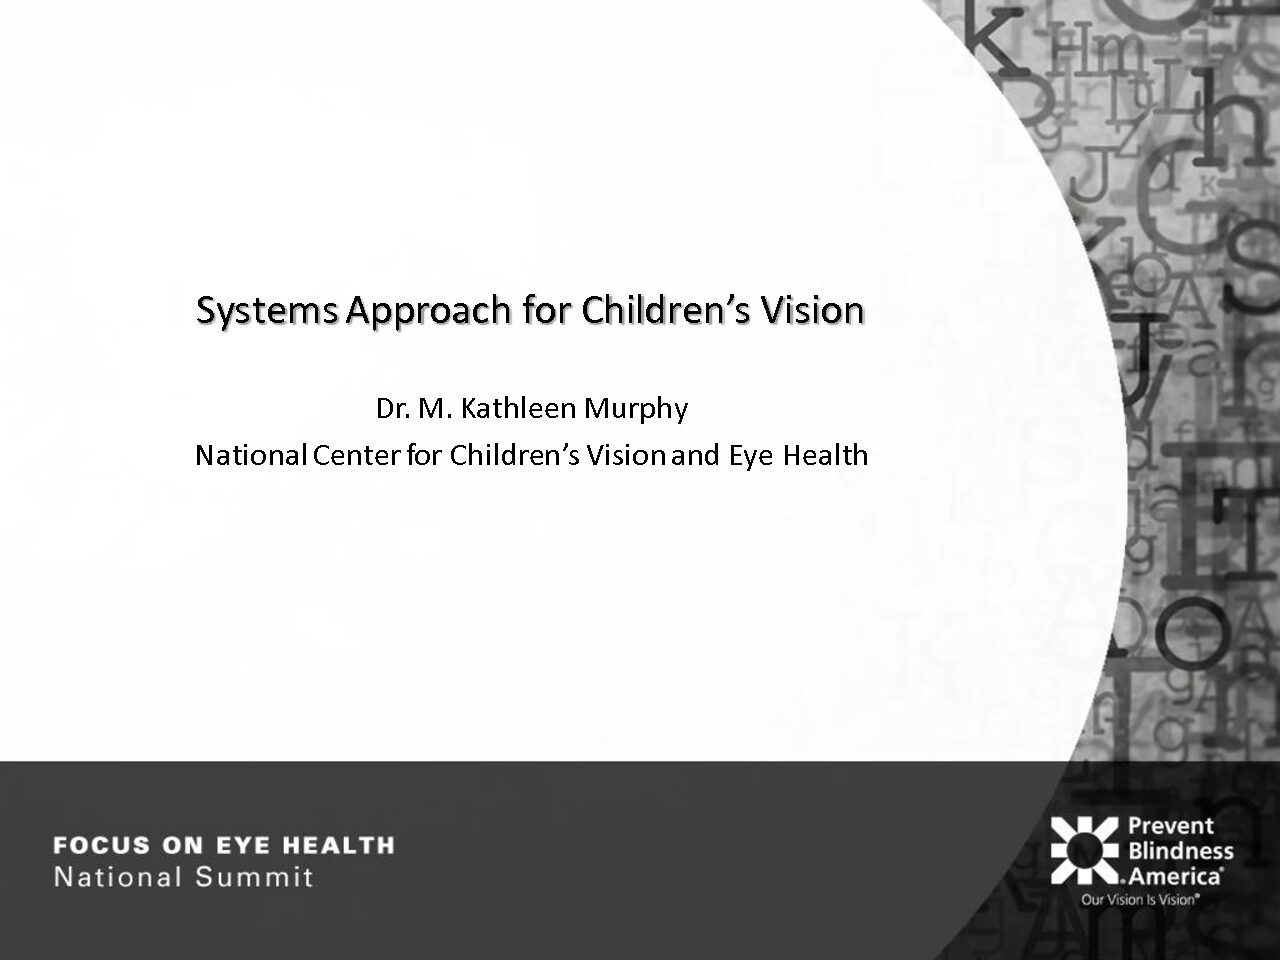 Systems Approach for Children’s Vision